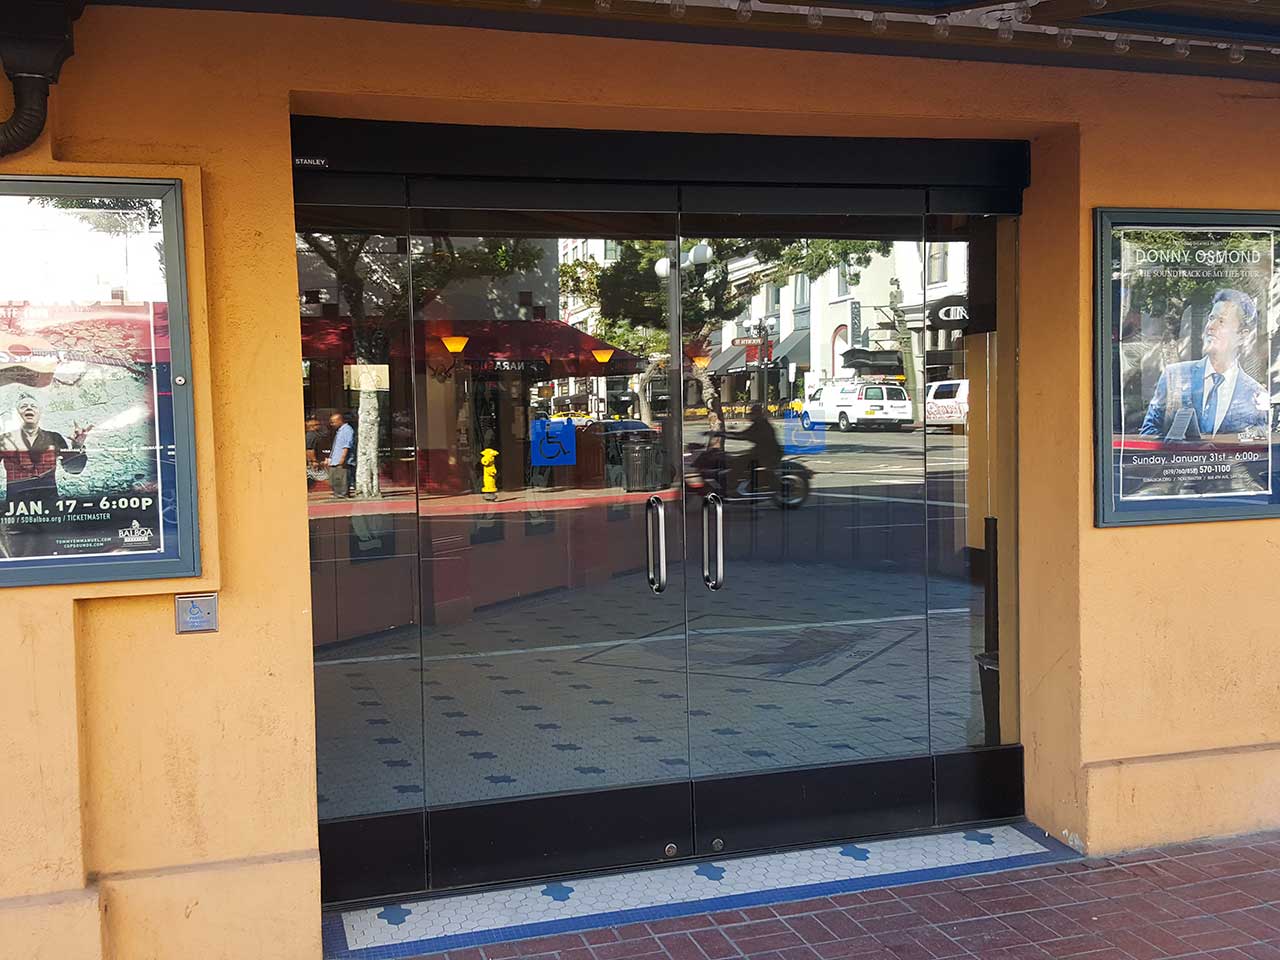 Balboa Theatre's all glass entrance from the outside